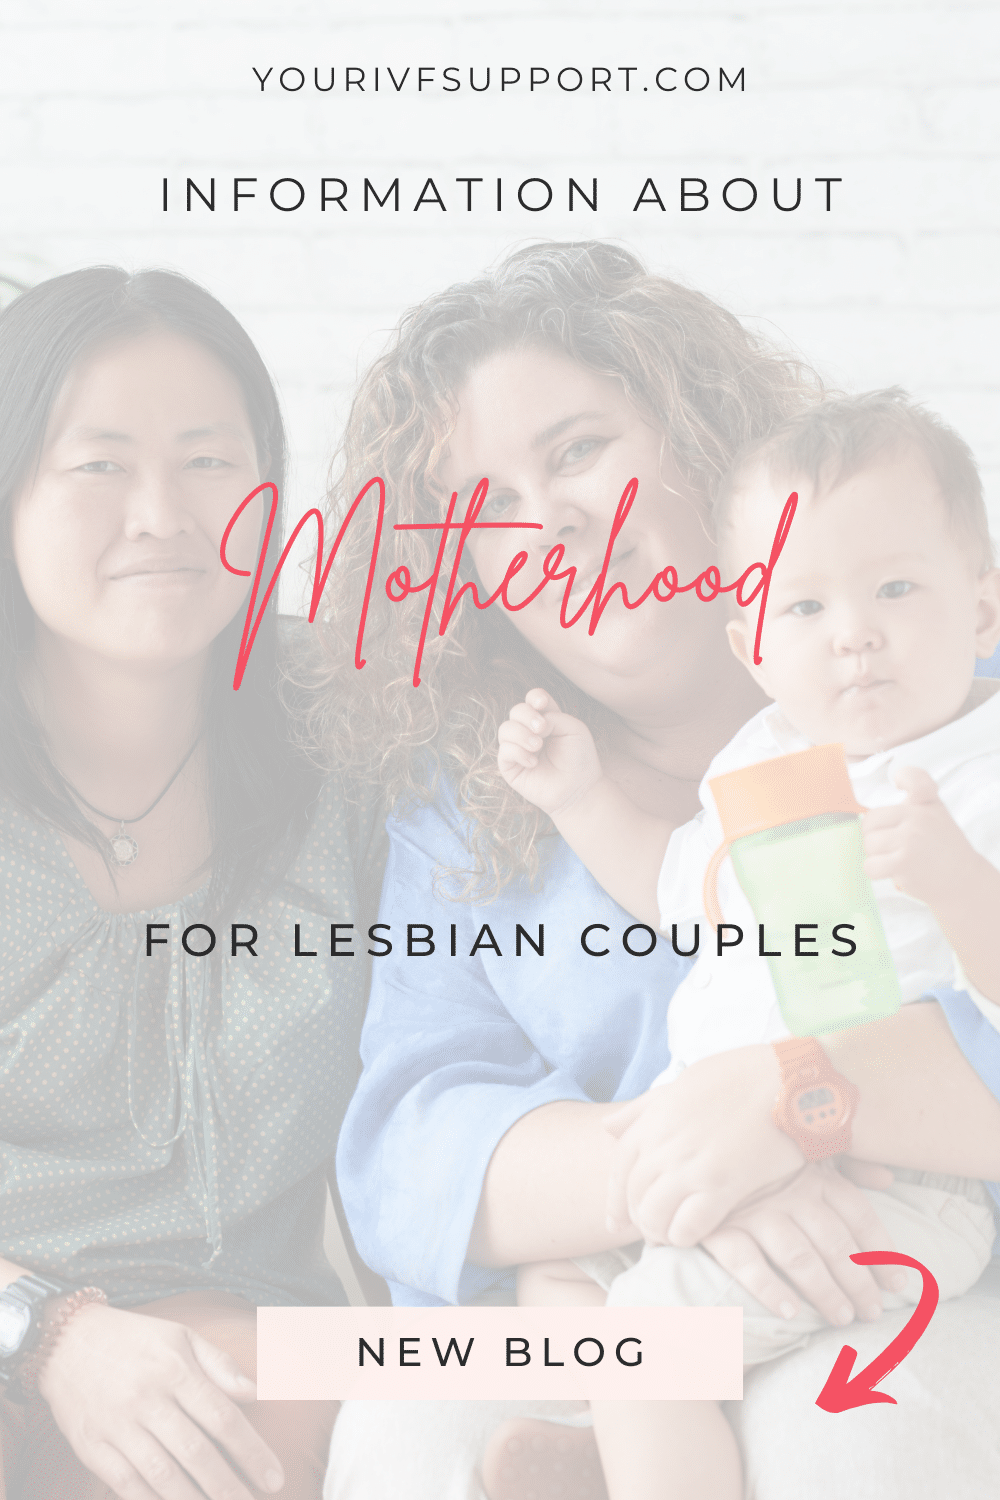 Having Children for Lesbian Couples: Options and Consideration